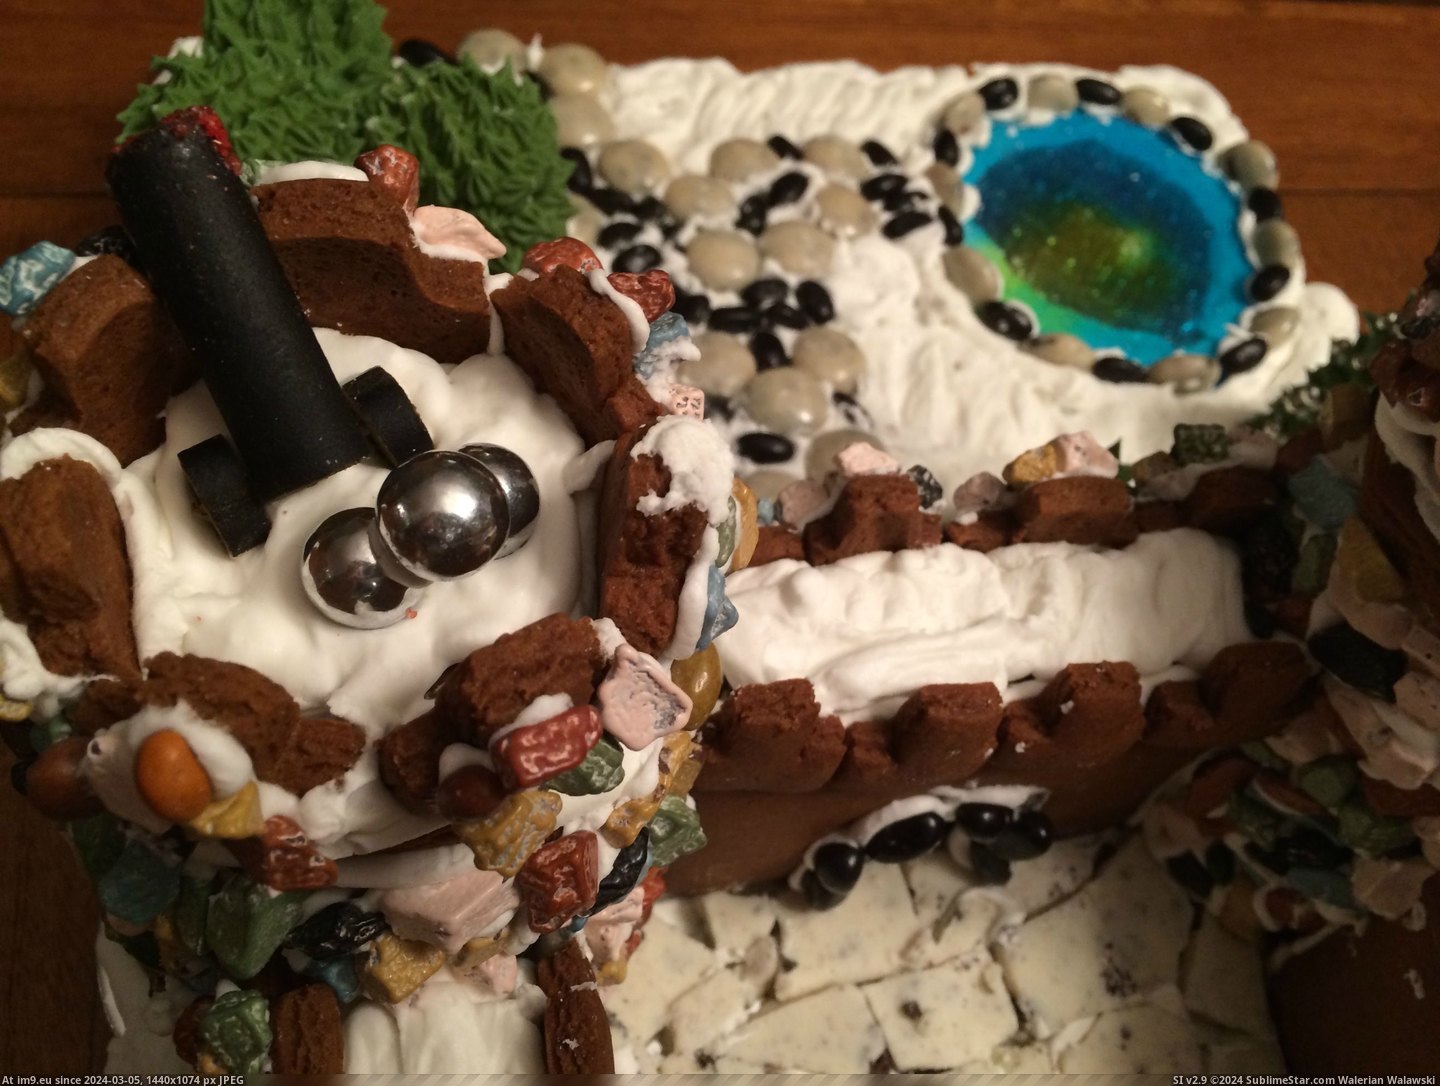 #Husband #Get #Our #Divorced #Collaborated #Project #Gingerbread #Success [Pics] My husband and I collaborated on our first gingerbread project and didn't get divorced...success! 7 Pic. (Bild von album My r/PICS favs))